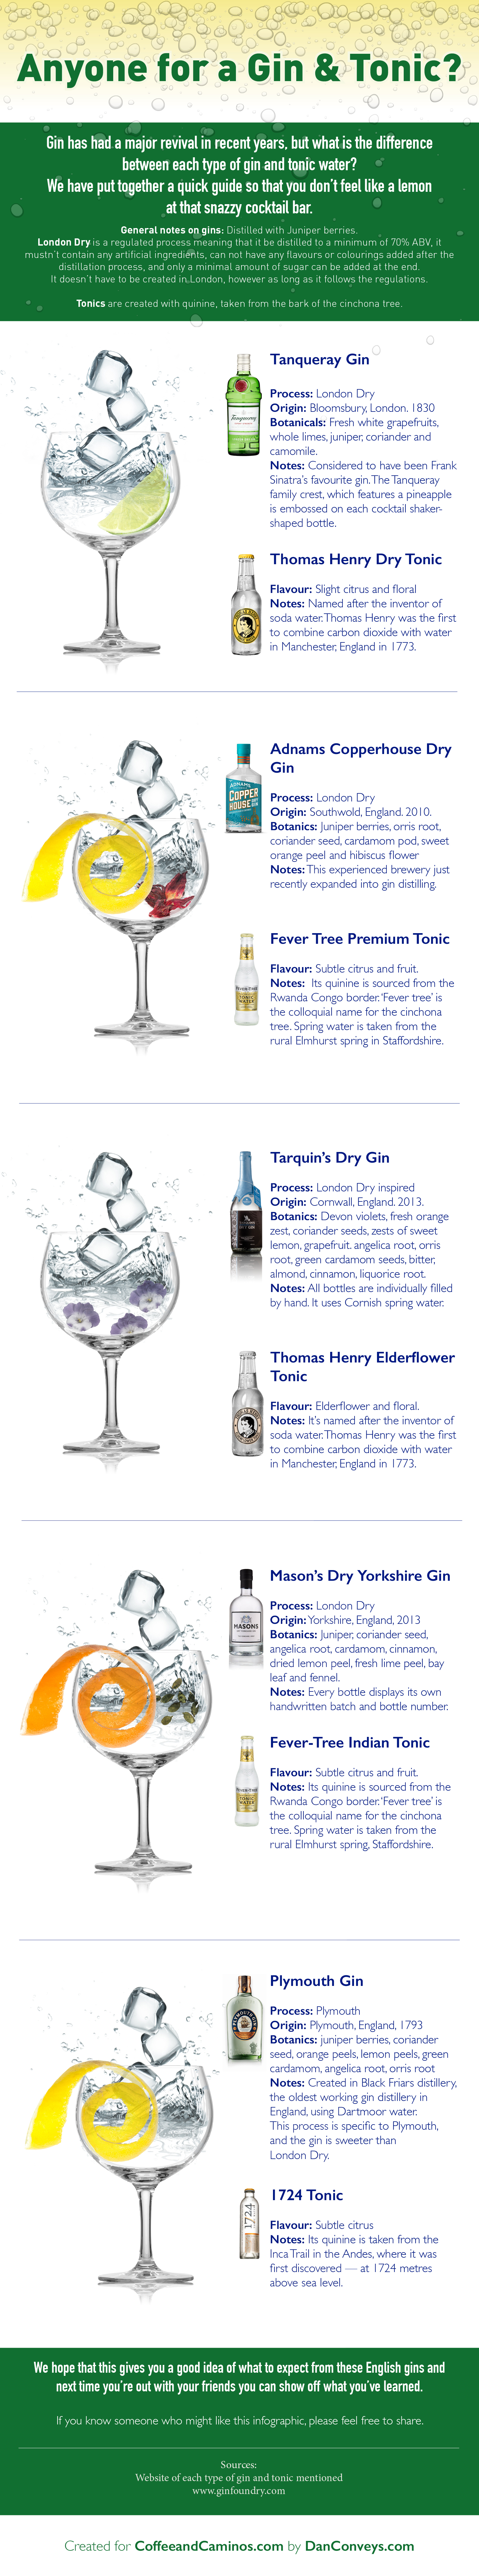 English gins, about tonics, gin and tonic combinations, best gin and tonics, about gins, gin process, London Dry gins